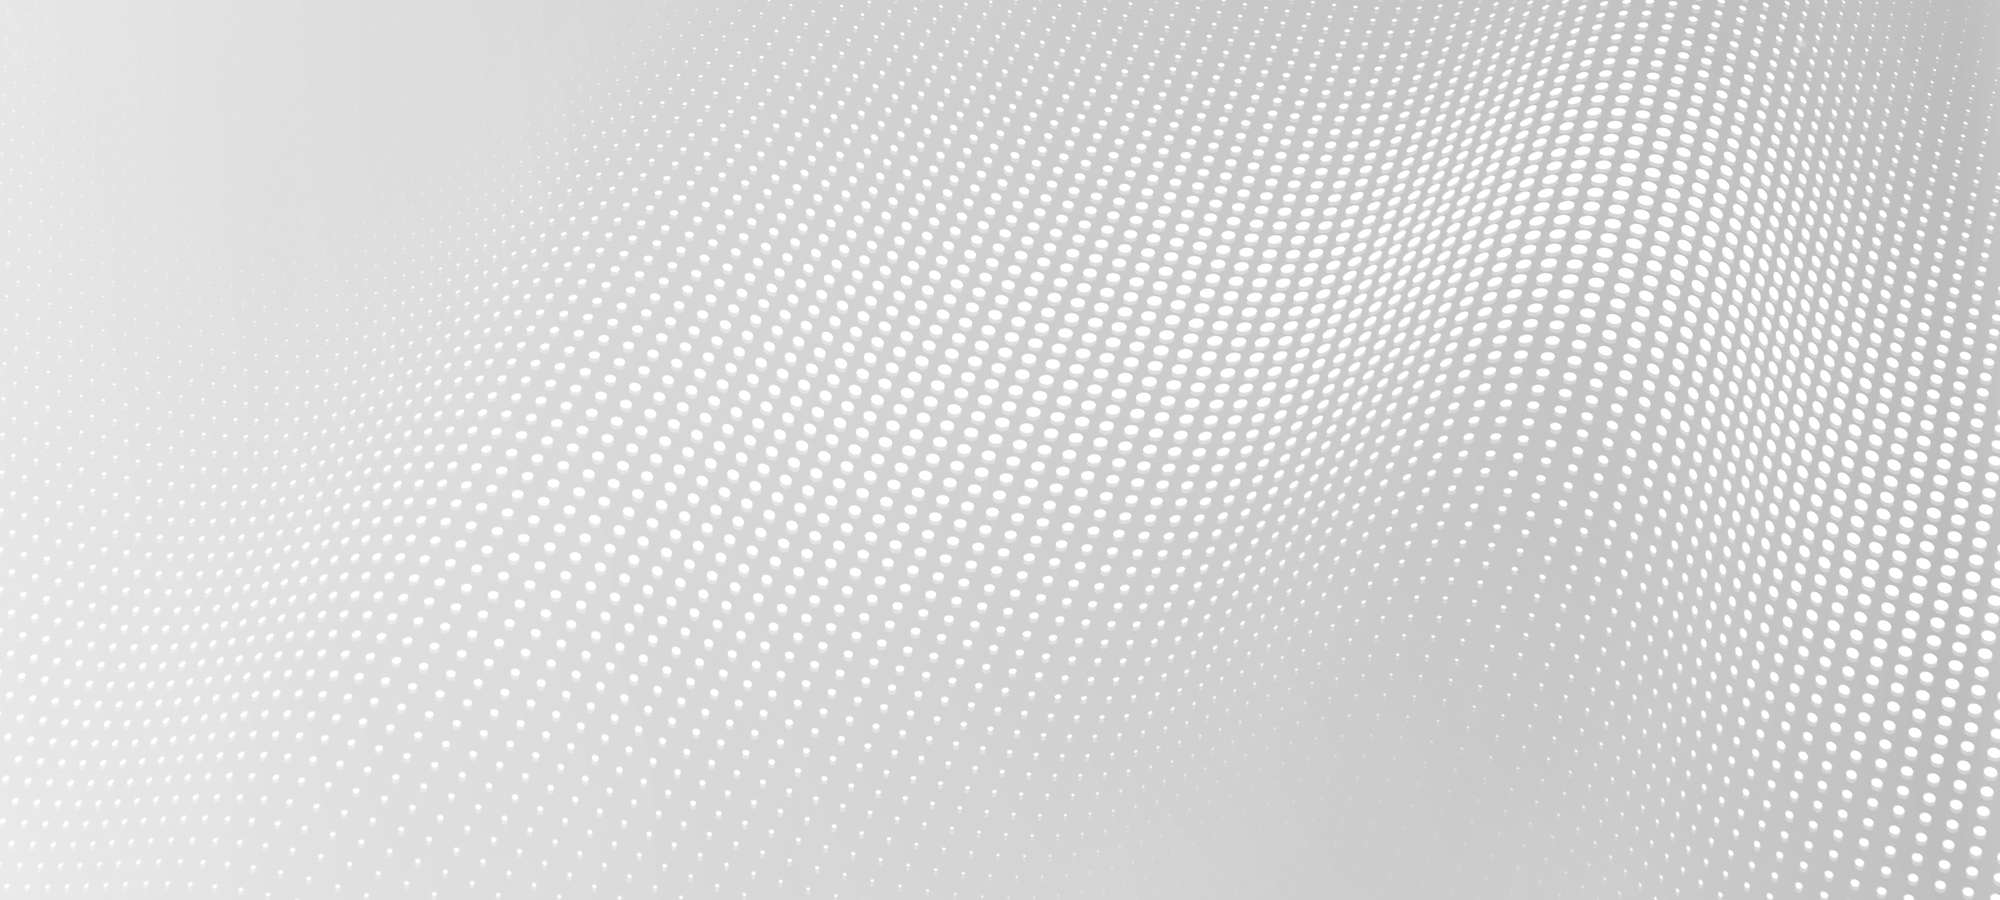 Wave pattern of white dots on a gray background